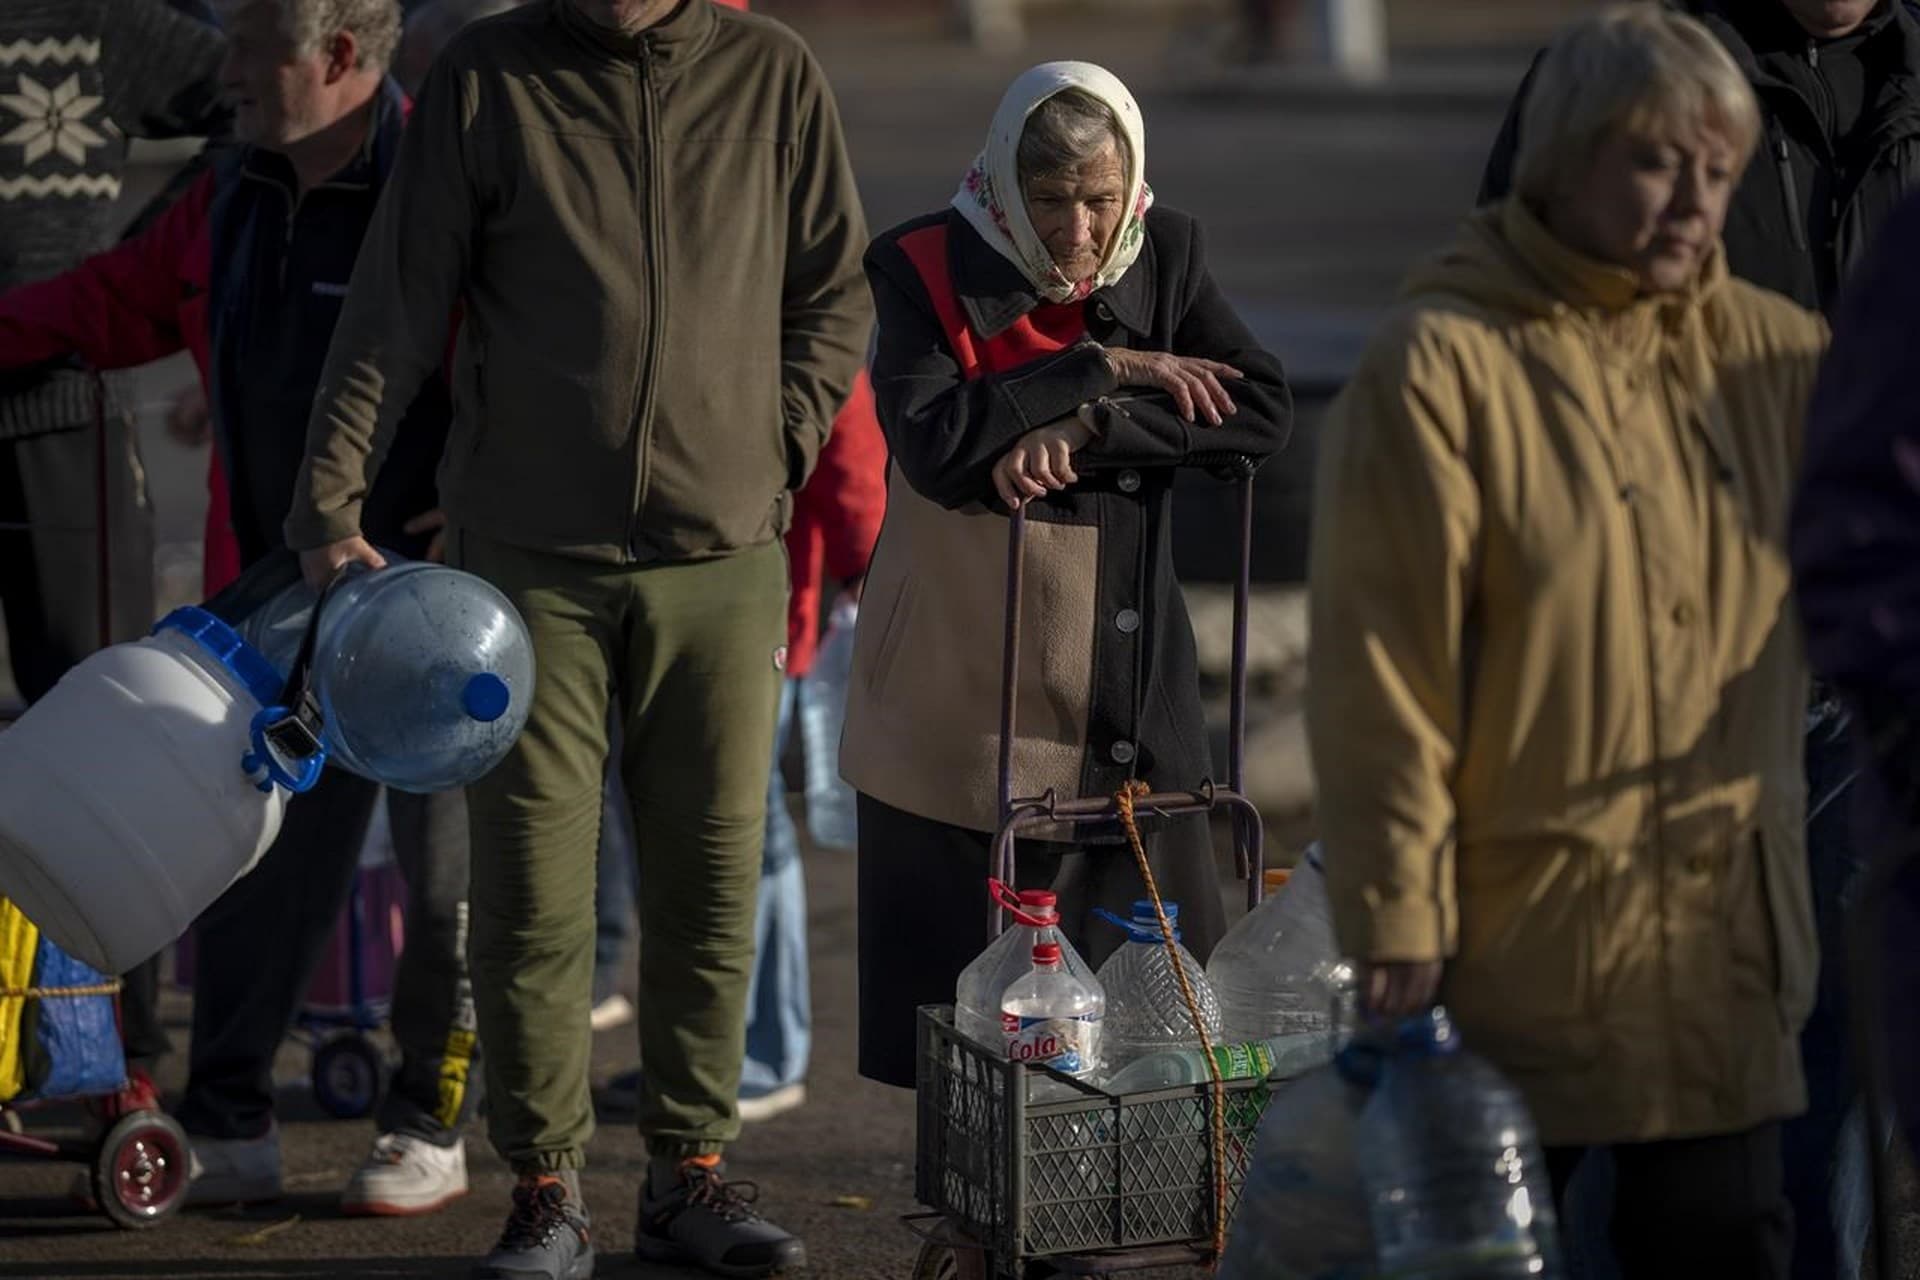 Olha Fedorivna, 83, waits to refill her plastic bottles with drinking water from a tank in the center of Mykolaiv